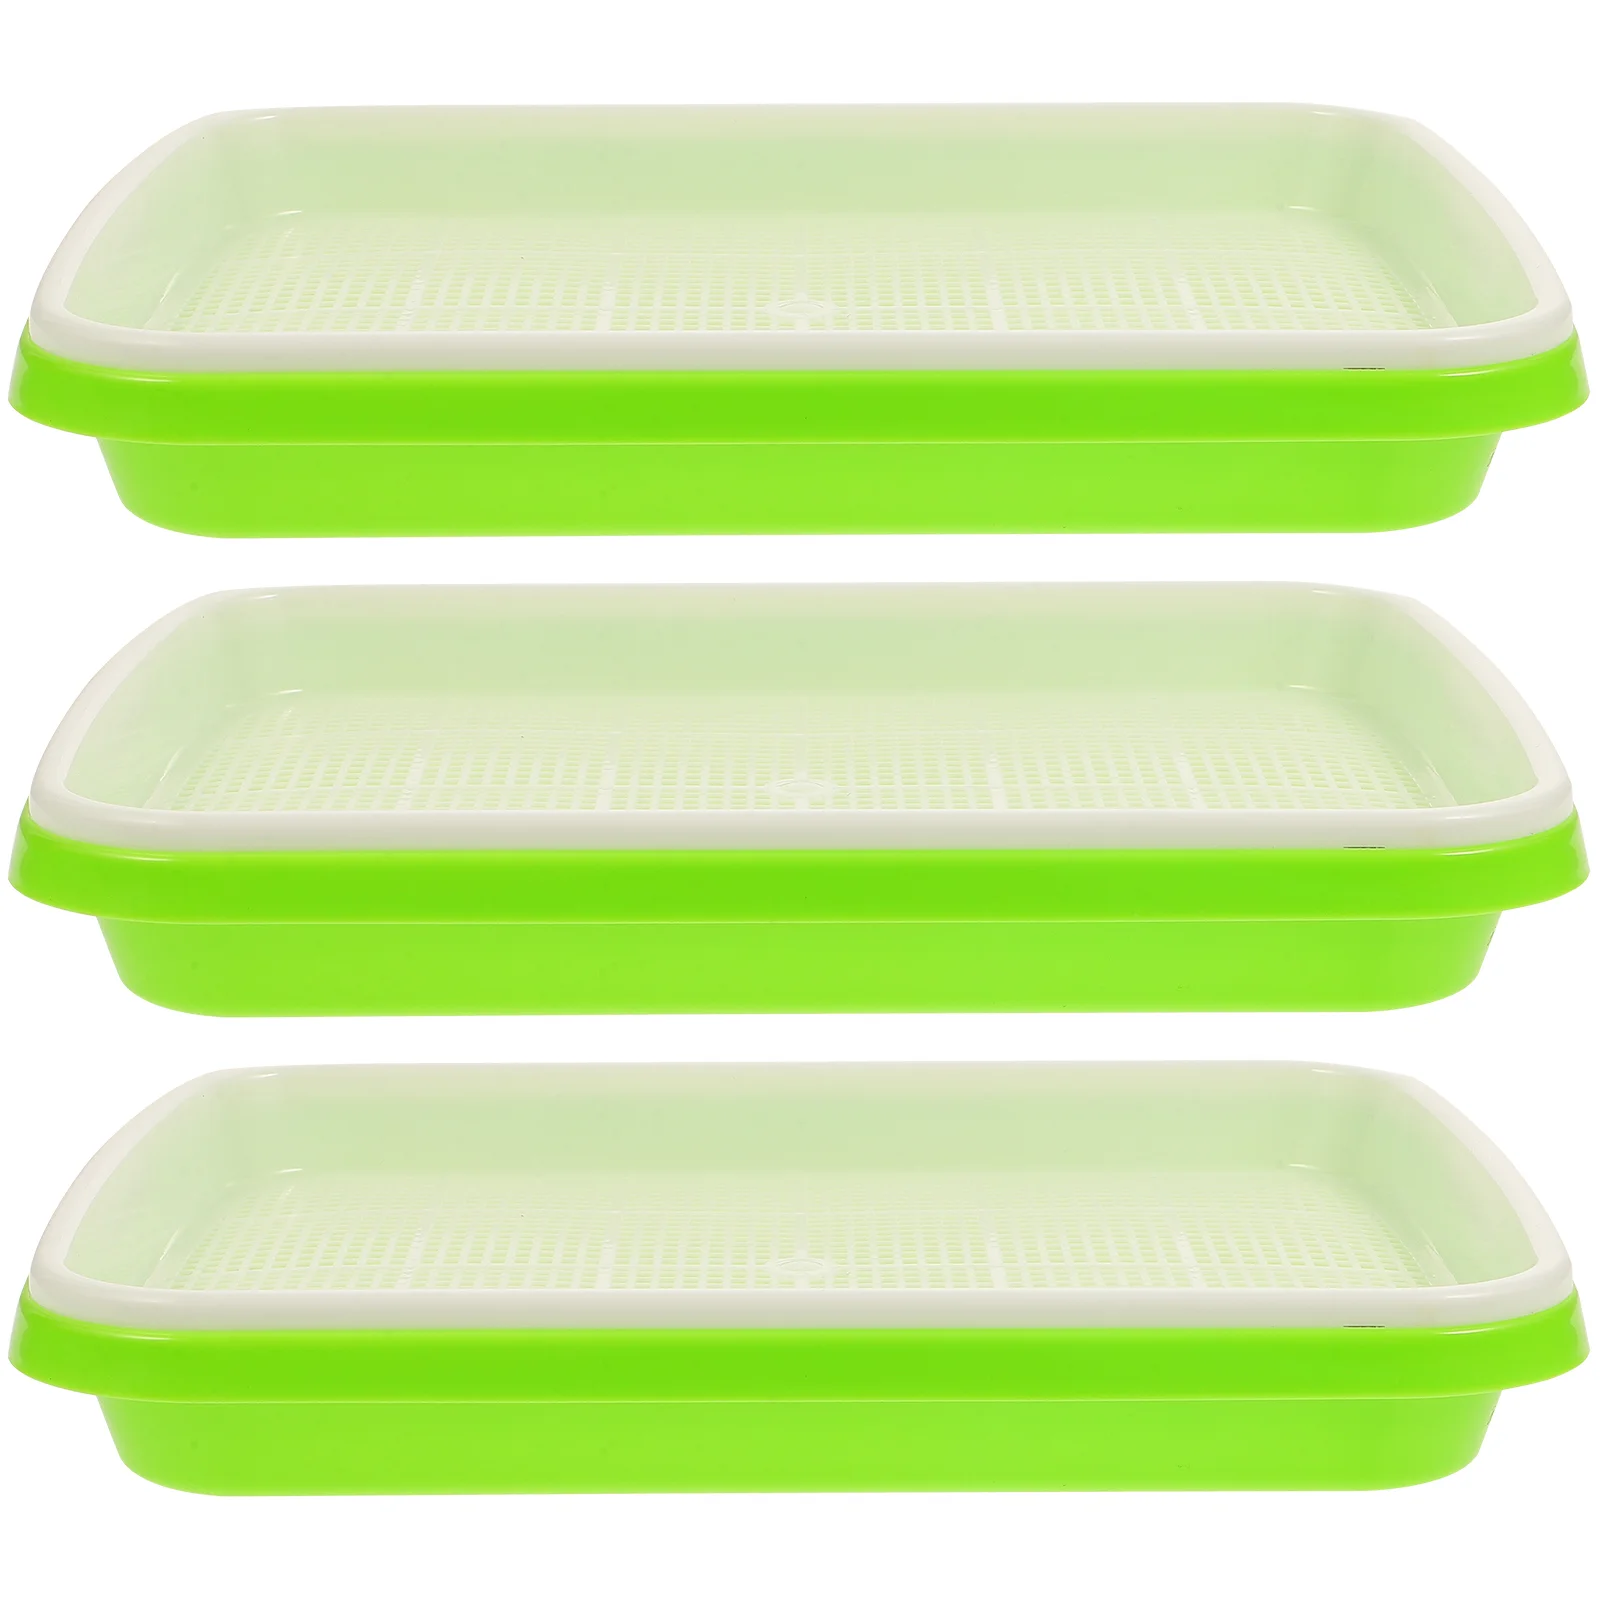 

3 Pcs Germination Tray Veggie Seeds Plate Starter Breeding Growing Plastic Raw Material Useful Soilless Sprout Trays Pot